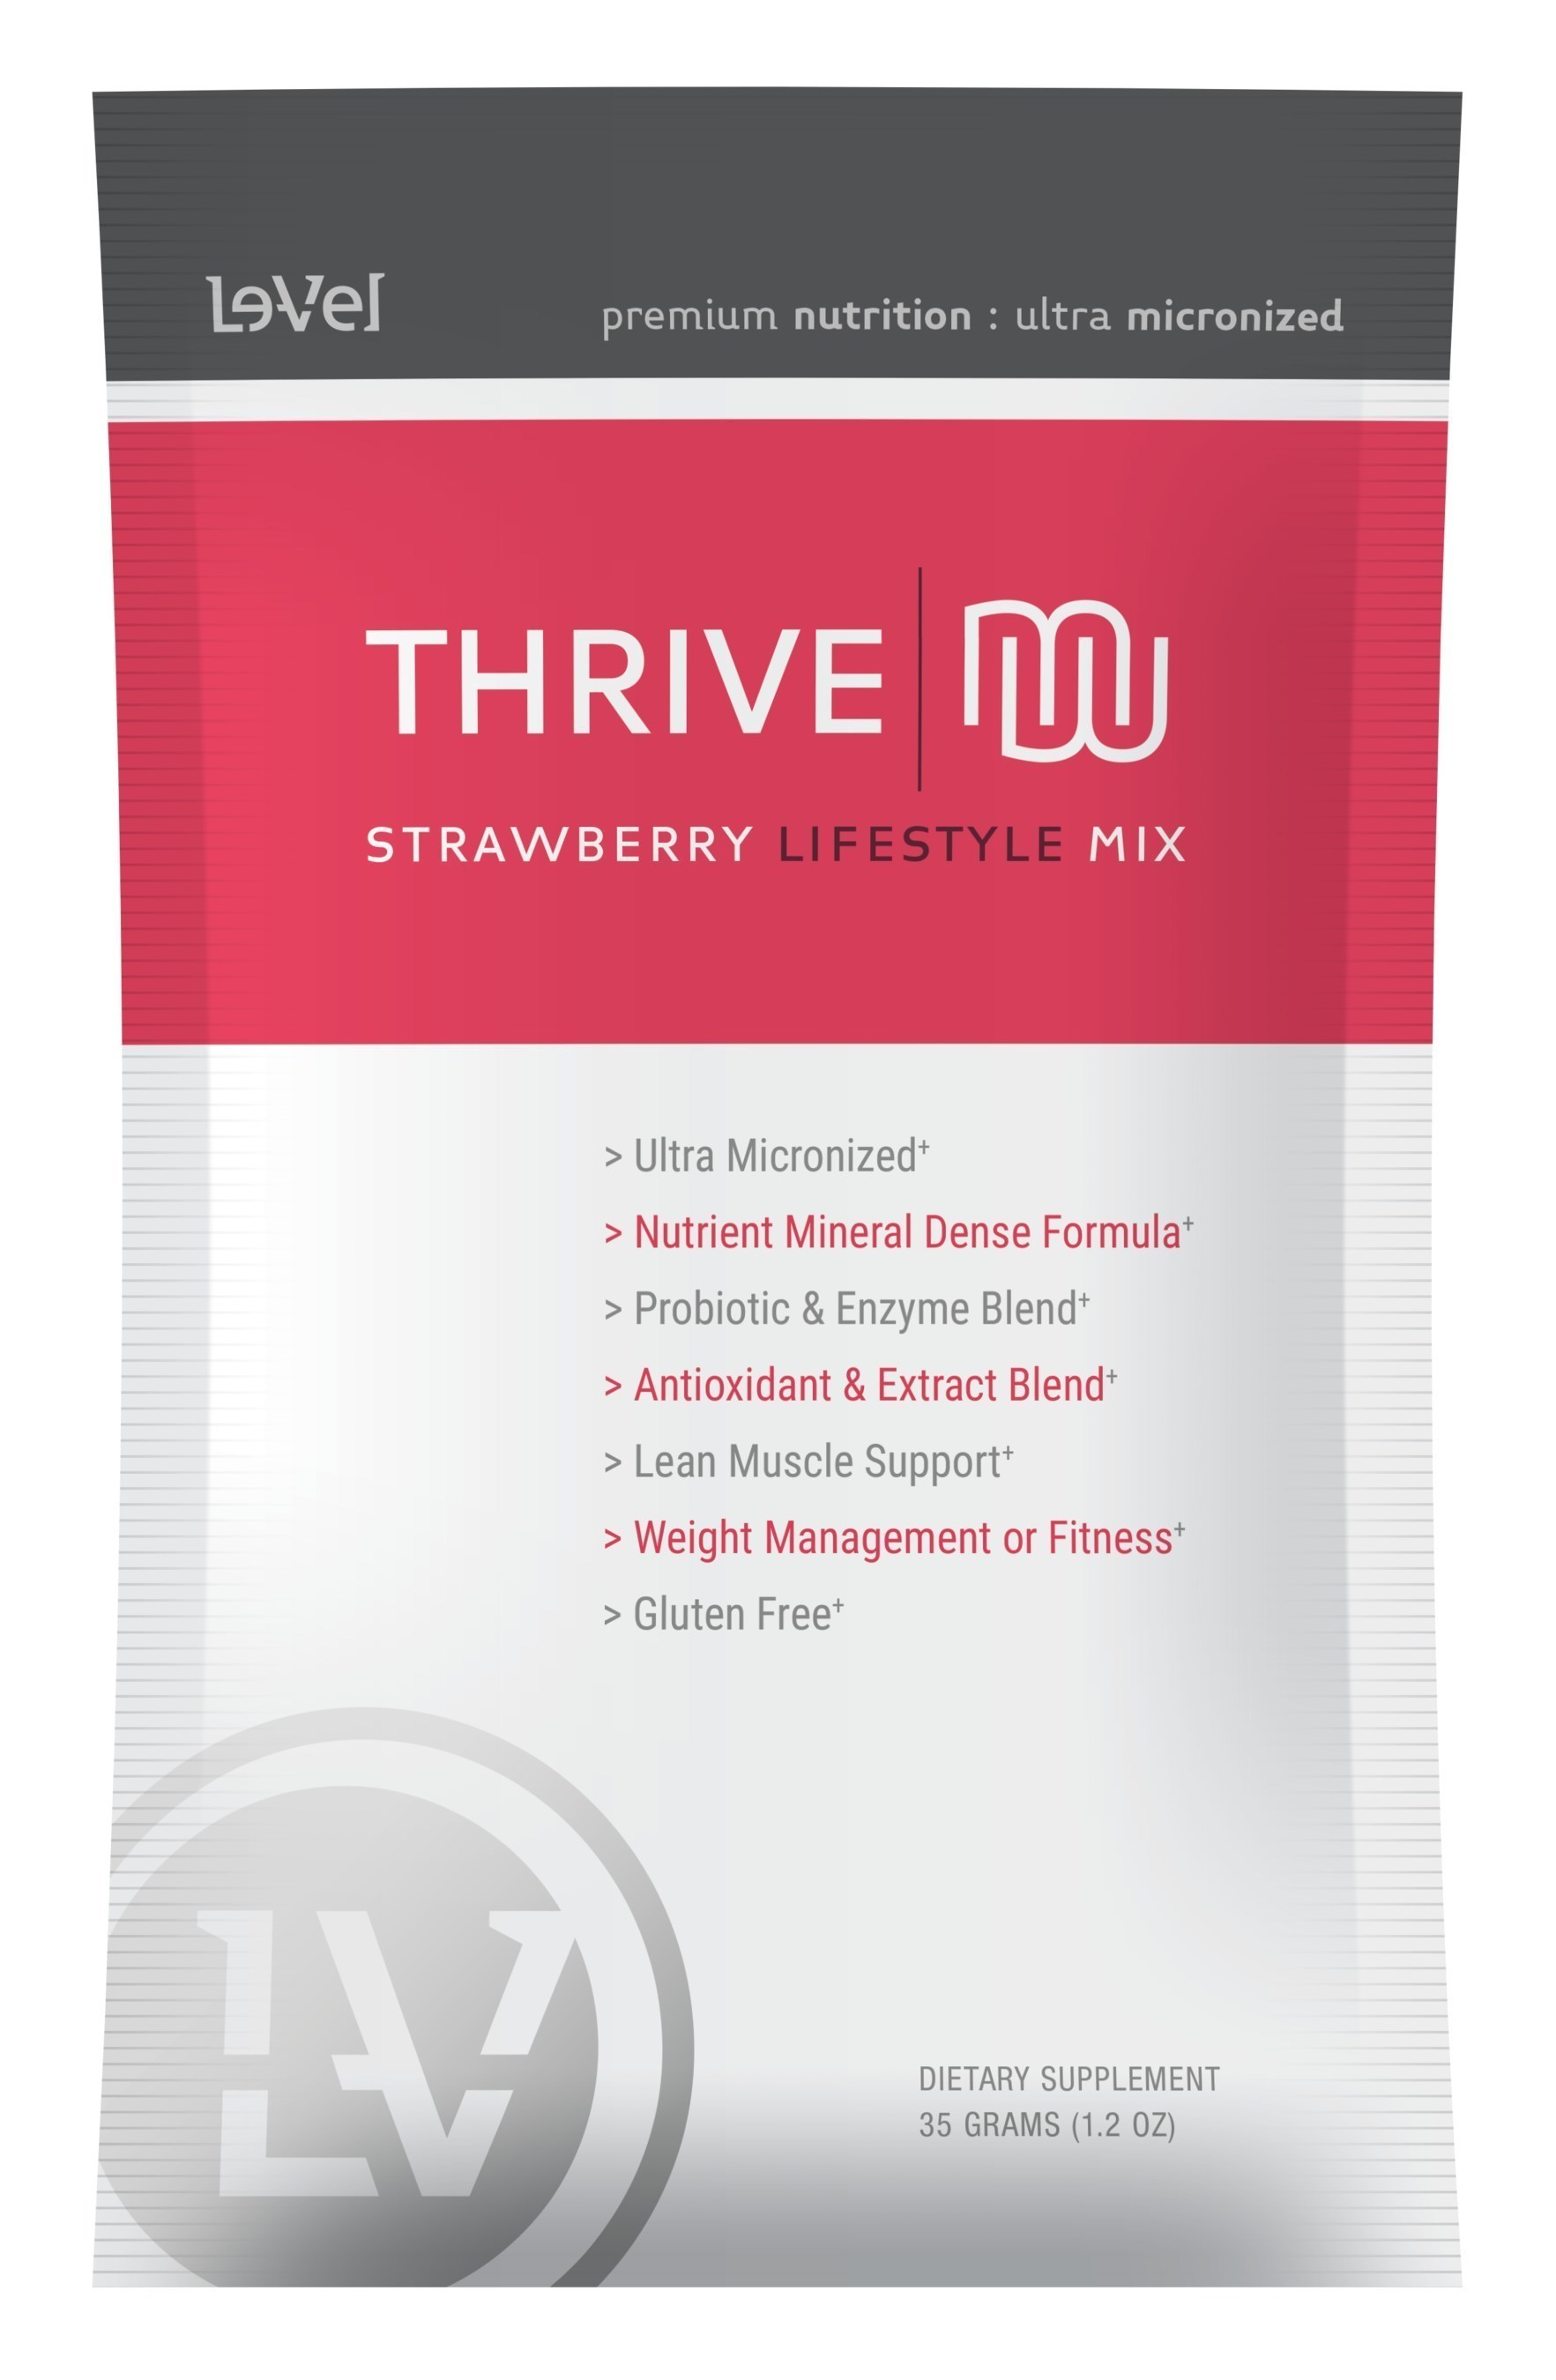 Le-Vel announced the addition of a new Thrive Premium Lifestyle Mix flavor: Creamy Strawberry.